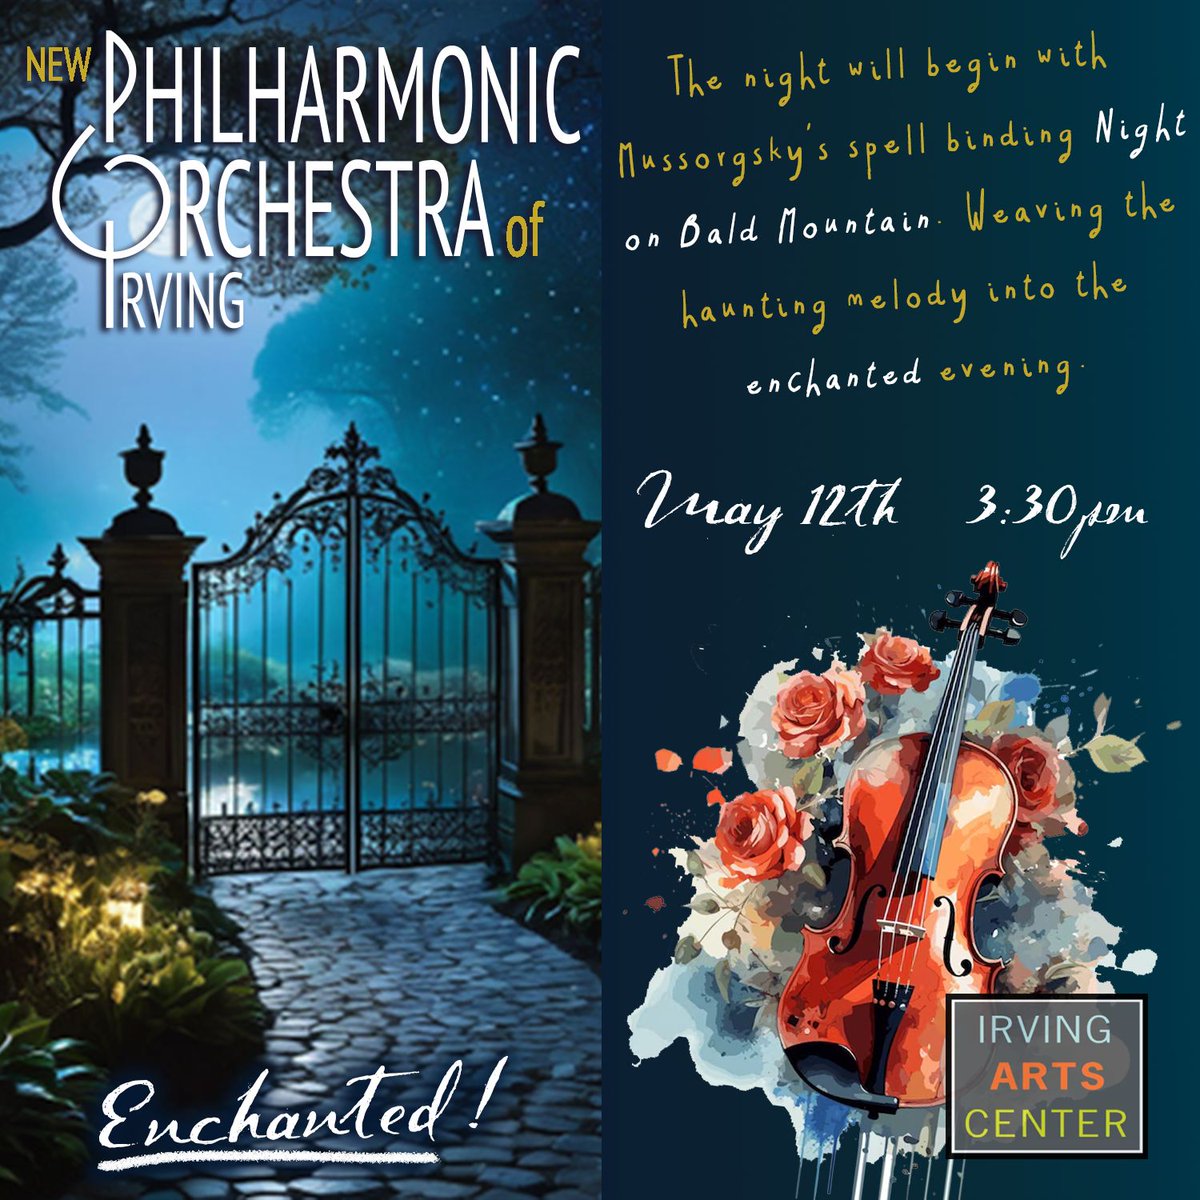 A beautiful line-up with talented musicians. Experience the mystical atmosphere of 'Enchantment!' Student tickets are only $10, seniors $15! Get Tickets Today -> buff.ly/44C0fHj #philharmonic #irvingtx #irvingarts #enchanted #nightonbaldmountain #cinderella